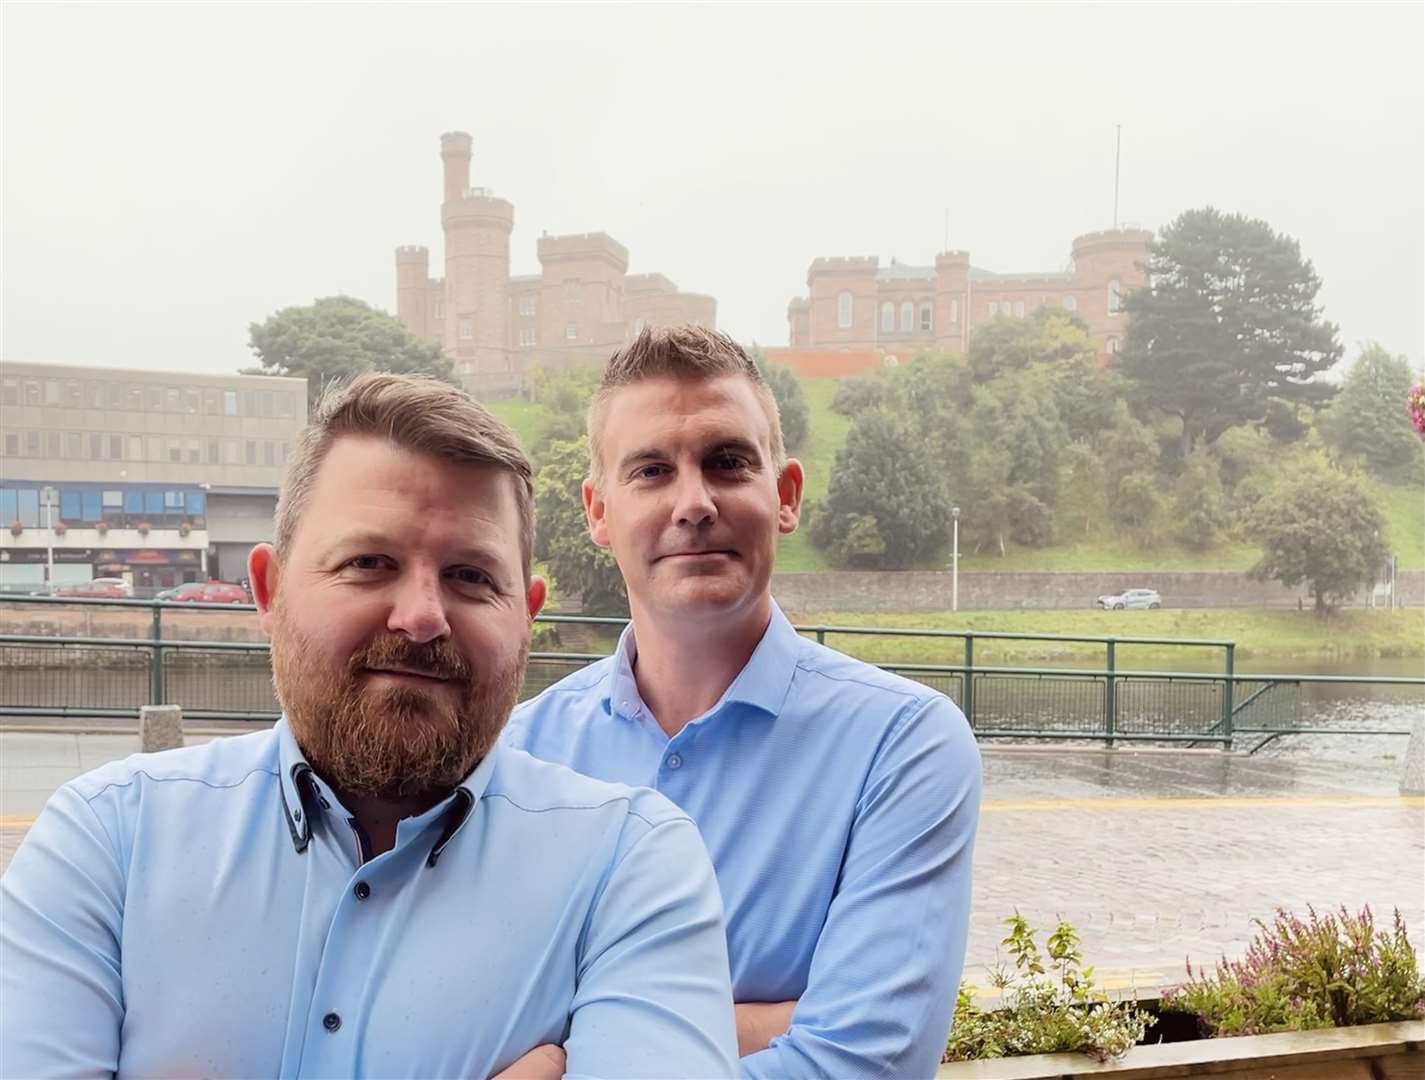 Cru Holdings directors Ken Loades (front) and Scott Murray have pledged to meet the Real Living Wage across all six of the company’s venues.